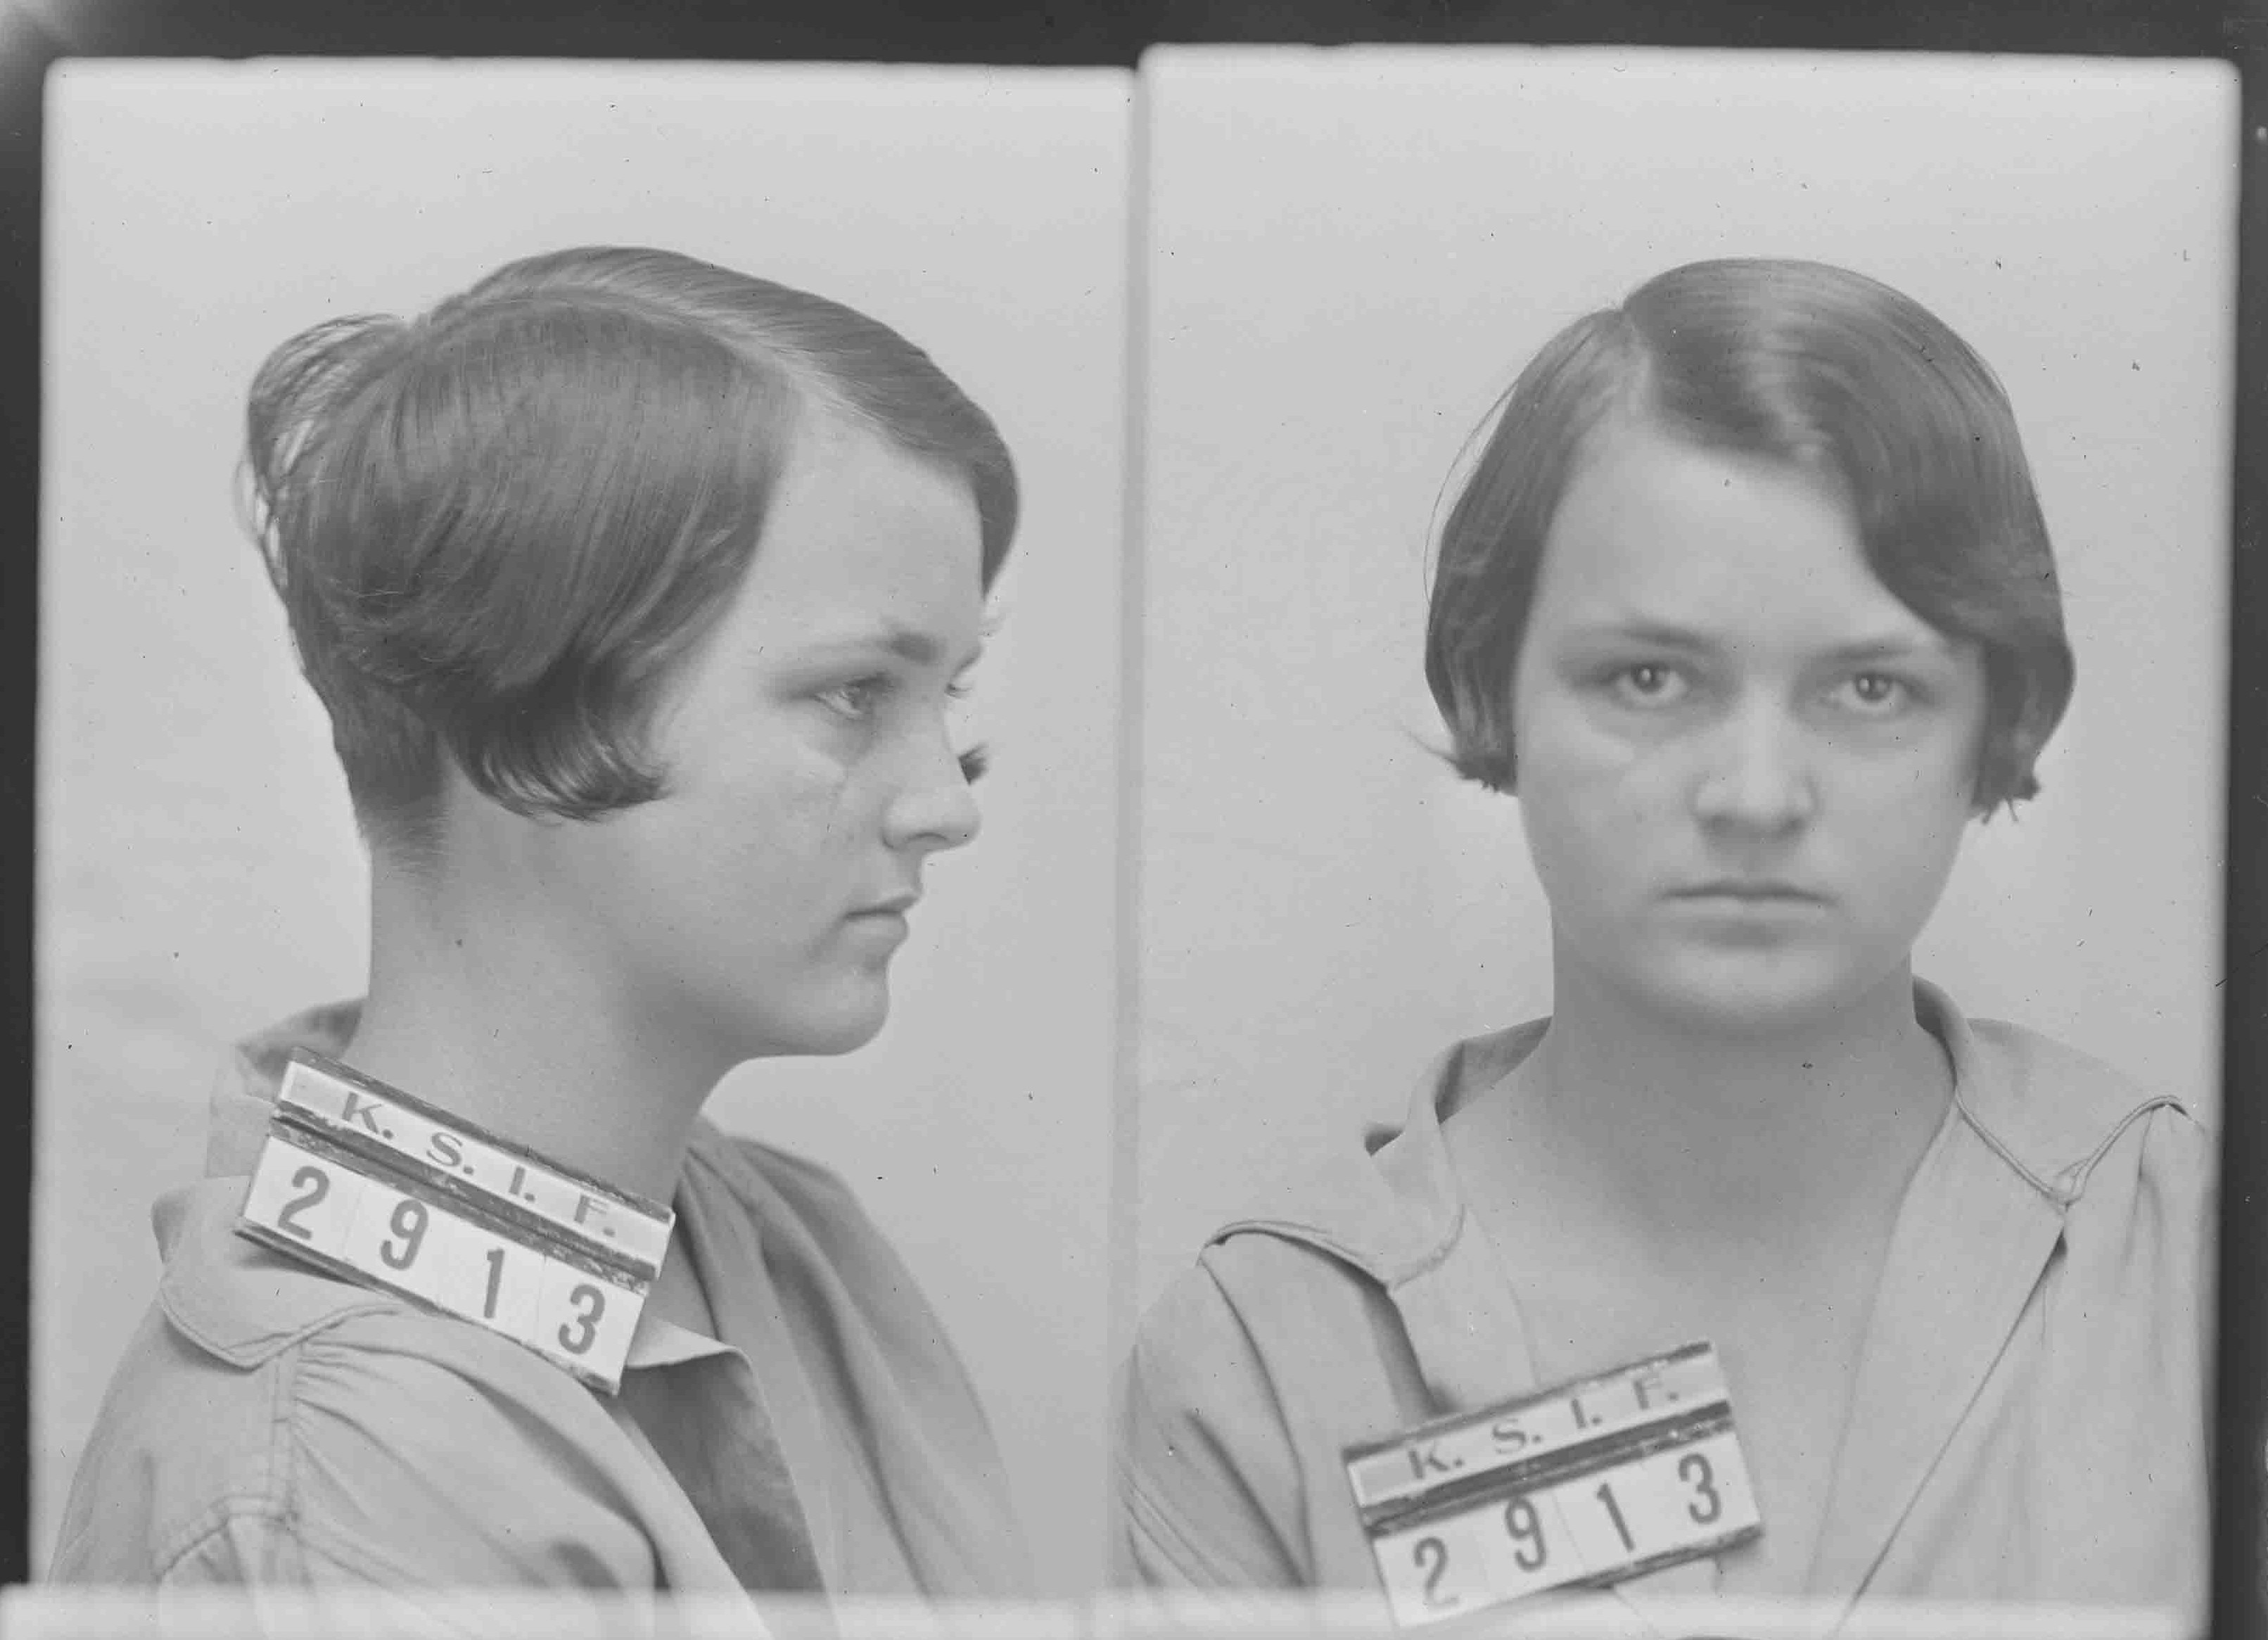 A 15-year-old woman from Reno County is sentenced to five months at the Kansas State Industrial Farm in 1926. Photo courtesy of Lansing Historical Museum.